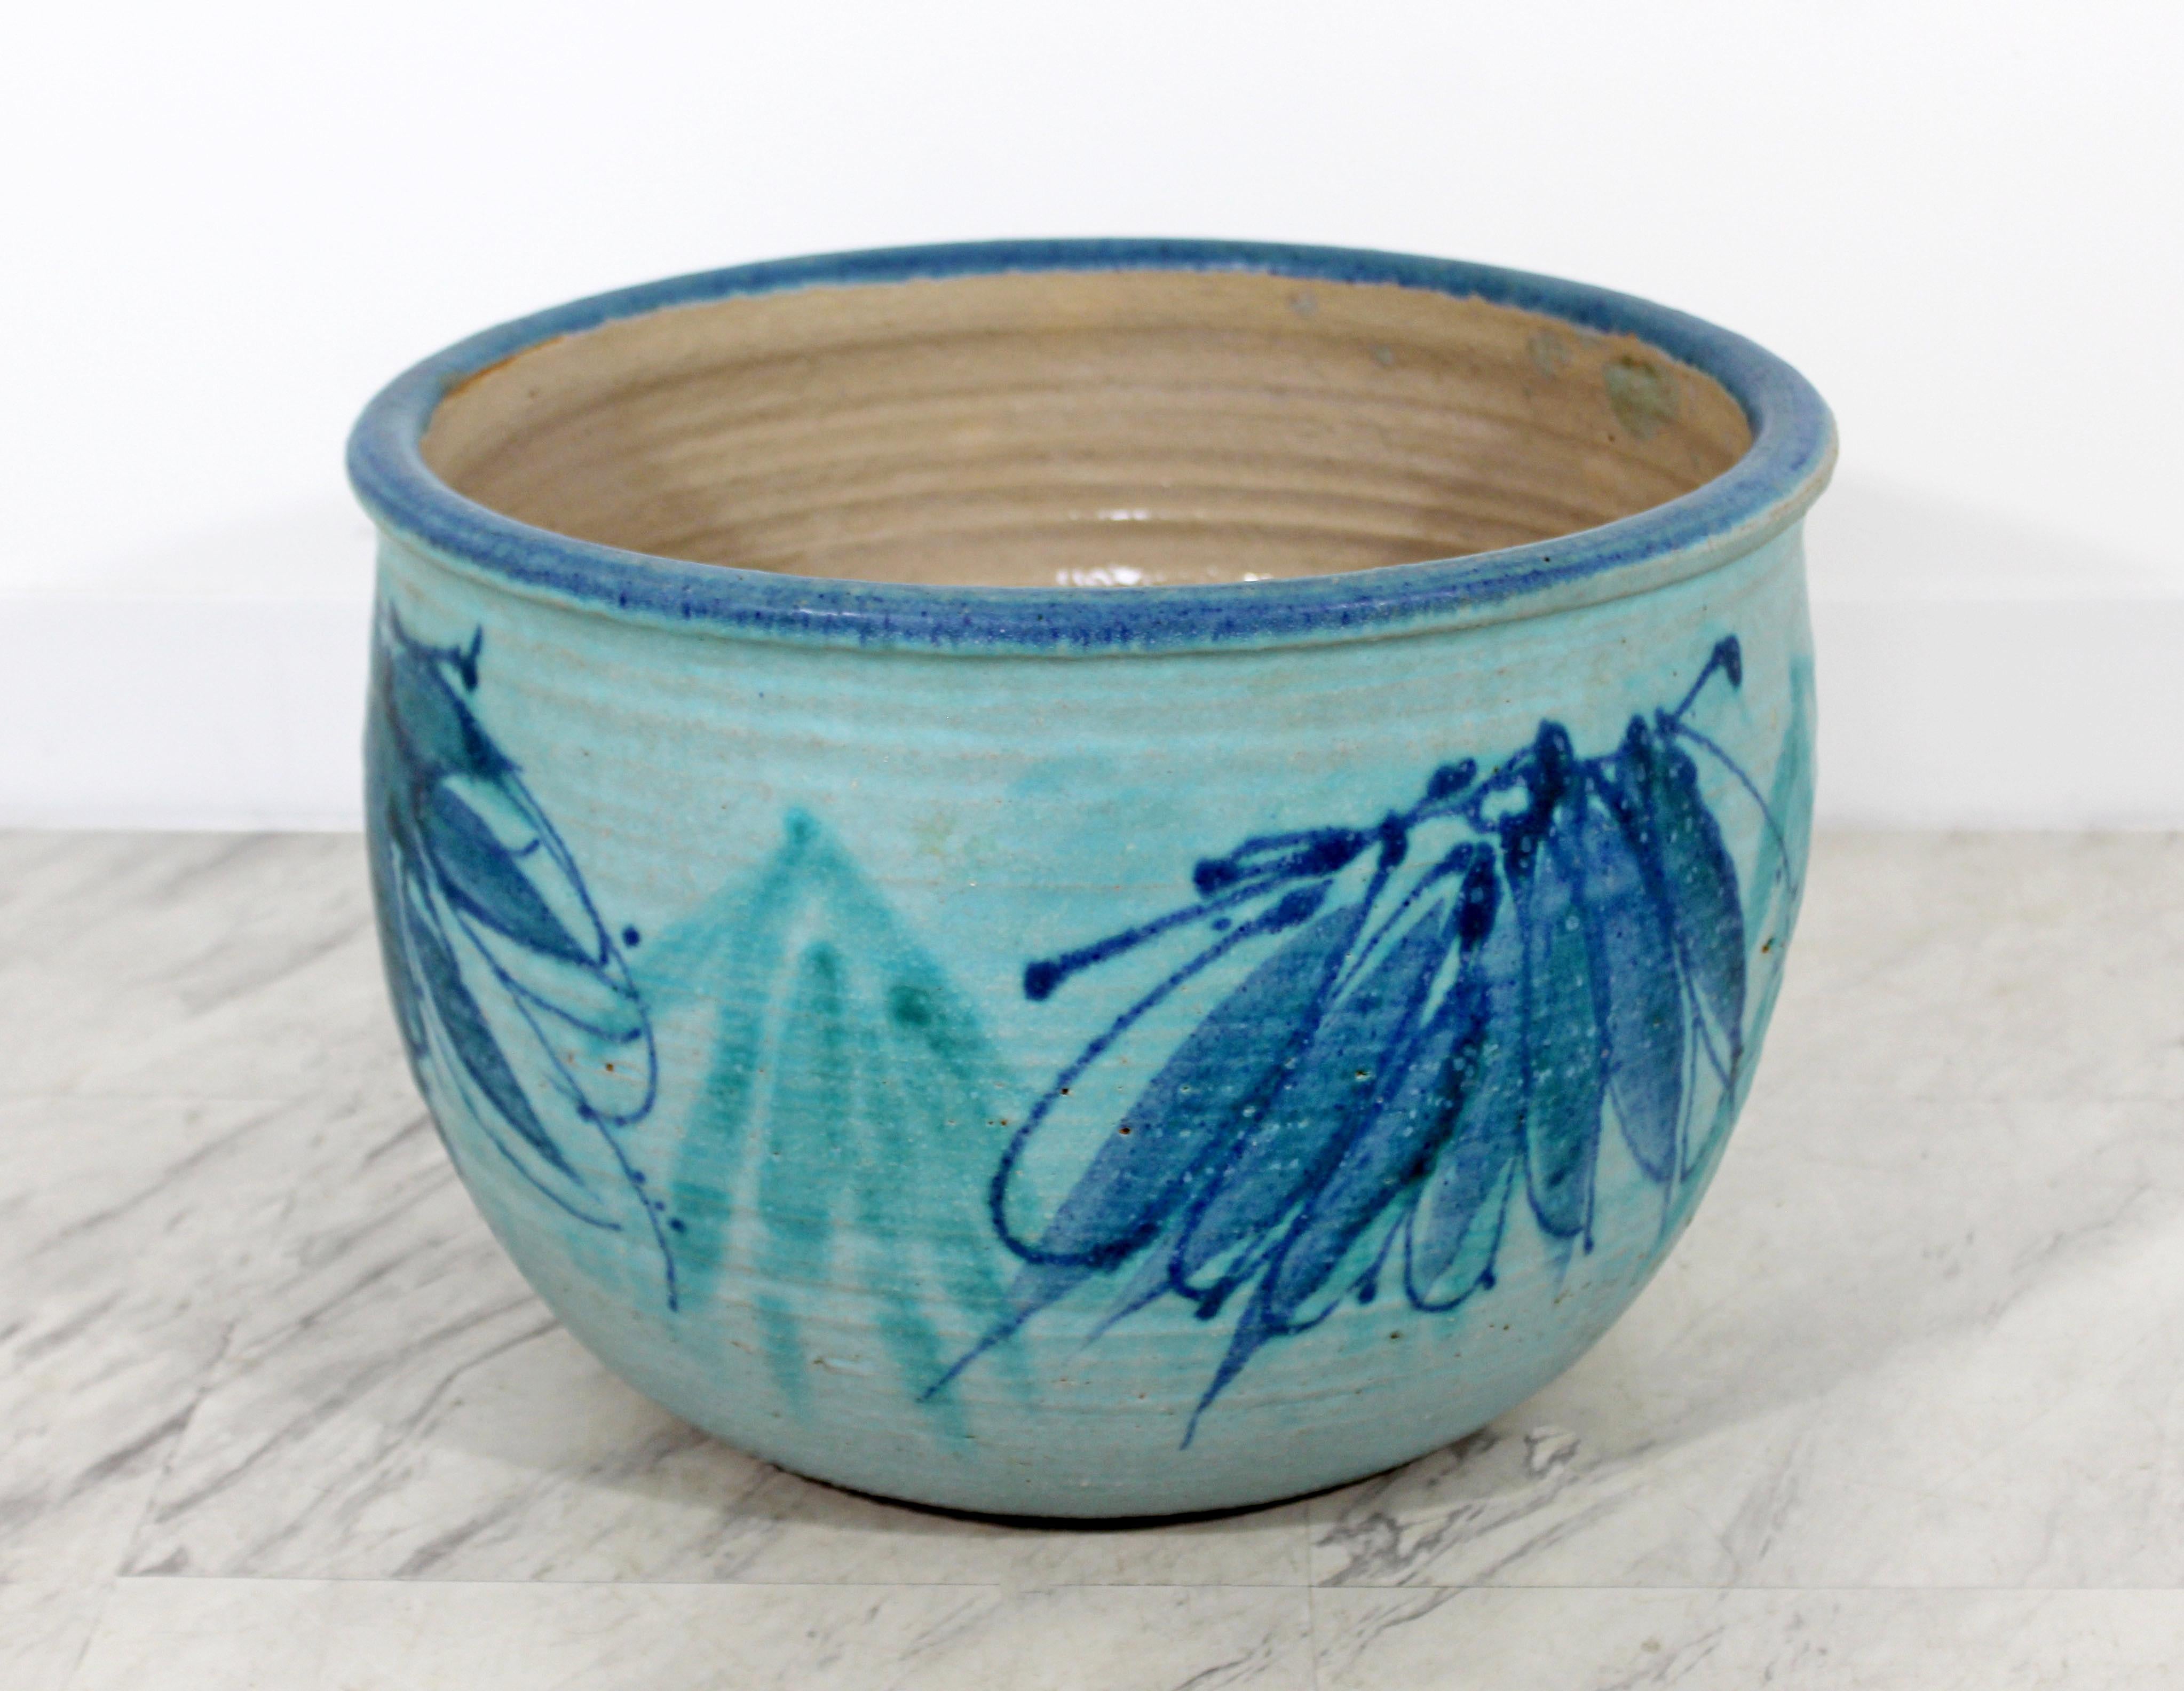 For your consideration is an rare exquisite, blue glazed ceramic pot, signed by J.T. Abernathy, circa 1960s. Cranbrook Studio artist. In excellent condition. The dimensions are 15